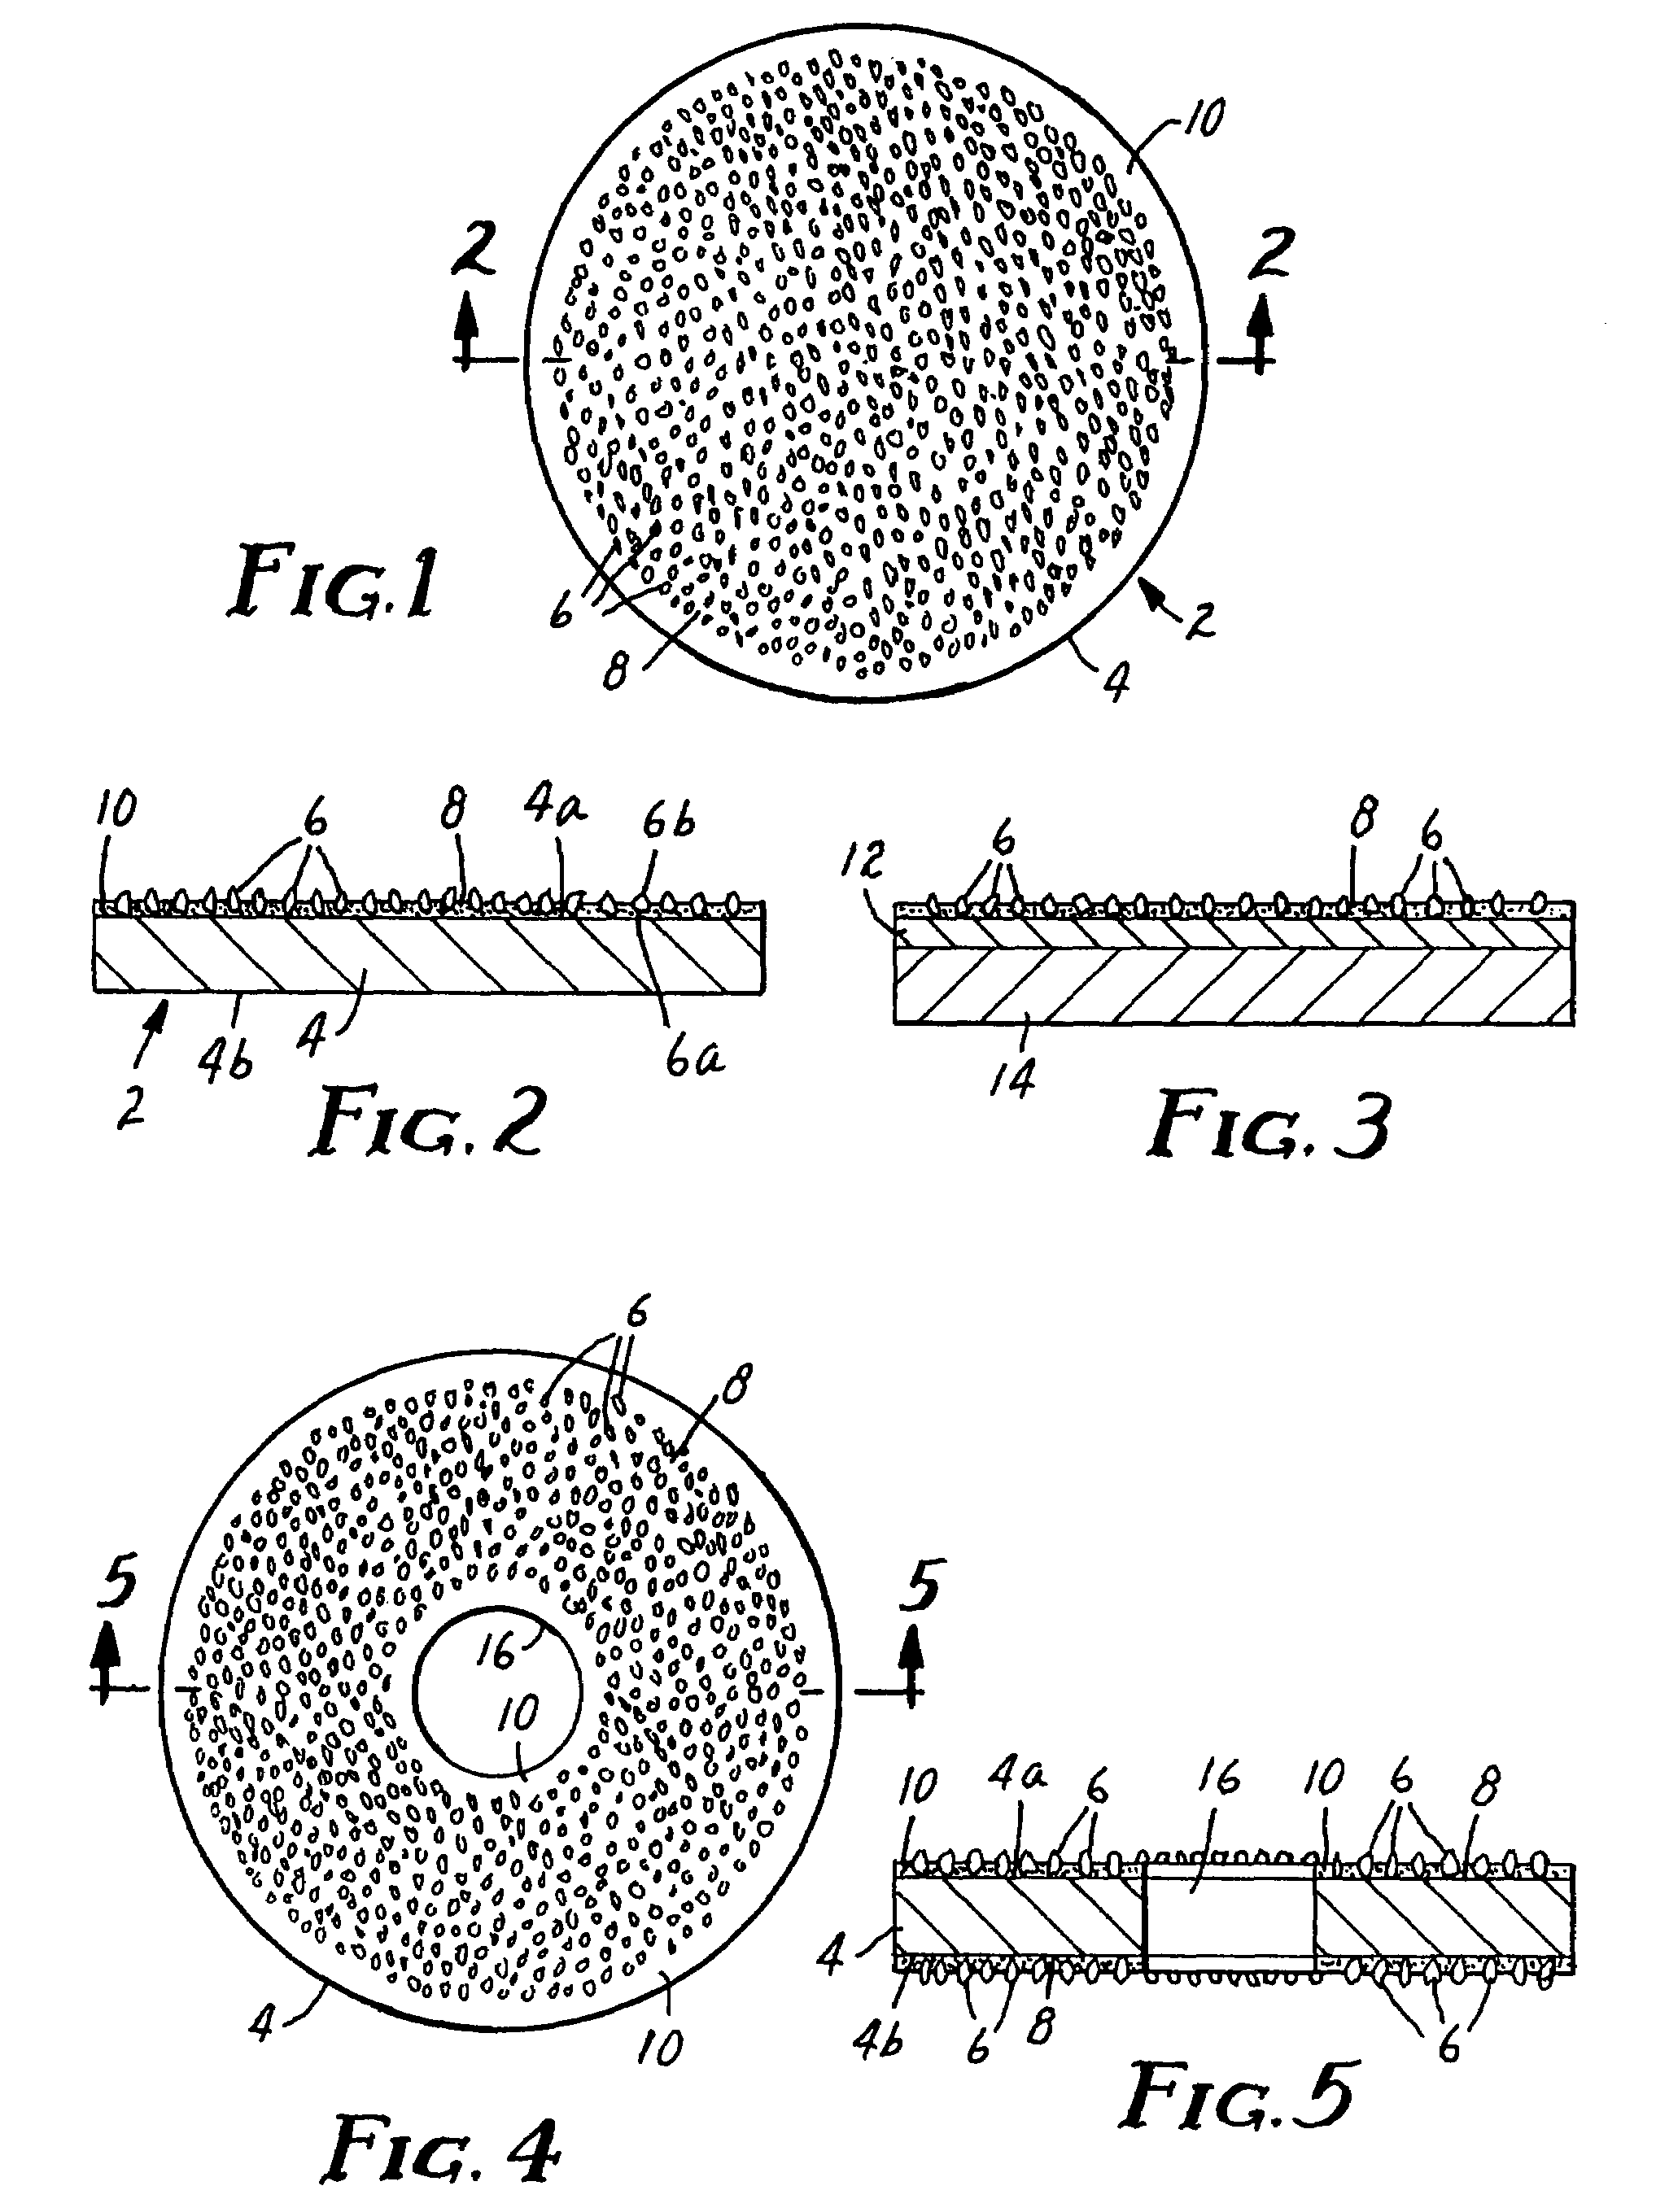 Corrosion resistant abrasive article and method of making